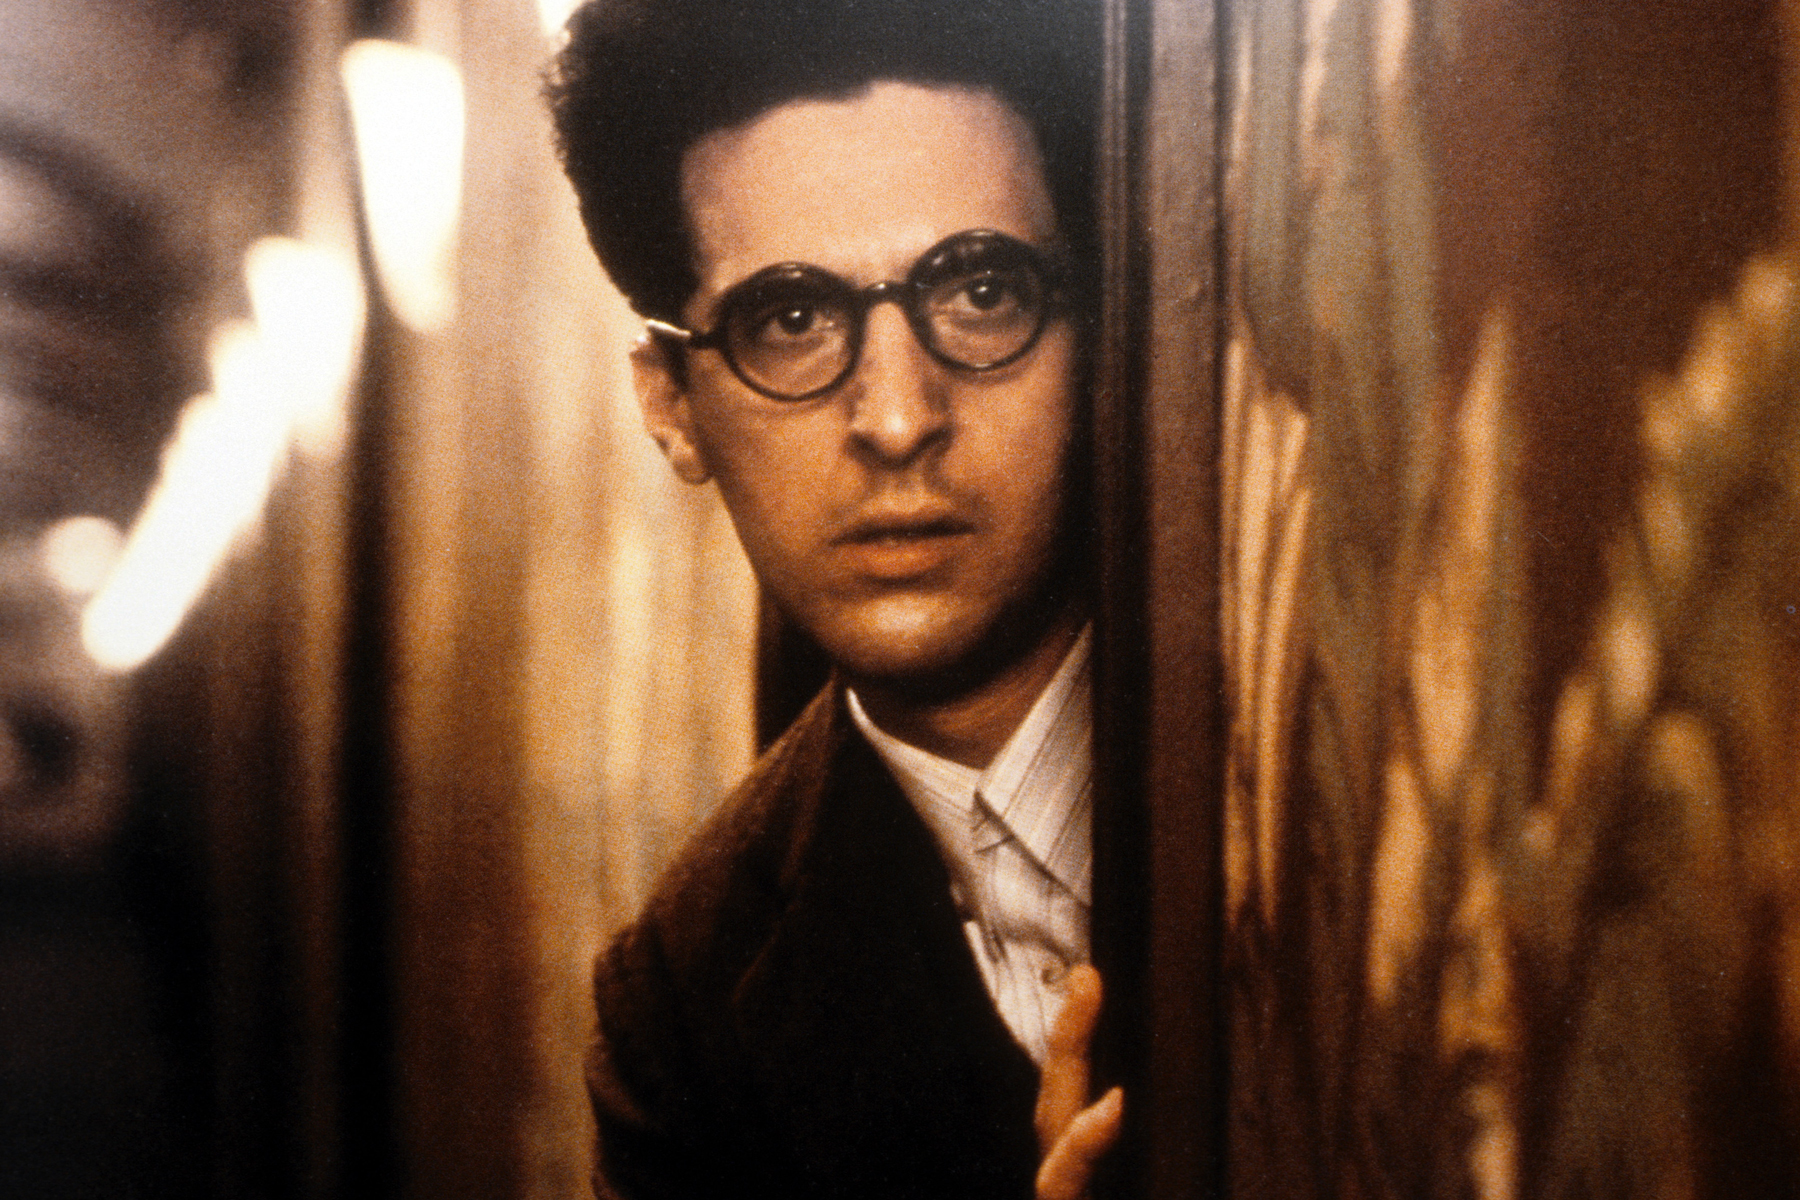 BARTON FINK, John Turturro, 1991. TM and Copyright © 20th Century Fox Film Corp. All rights reserved. Courtesy: Everett Collection